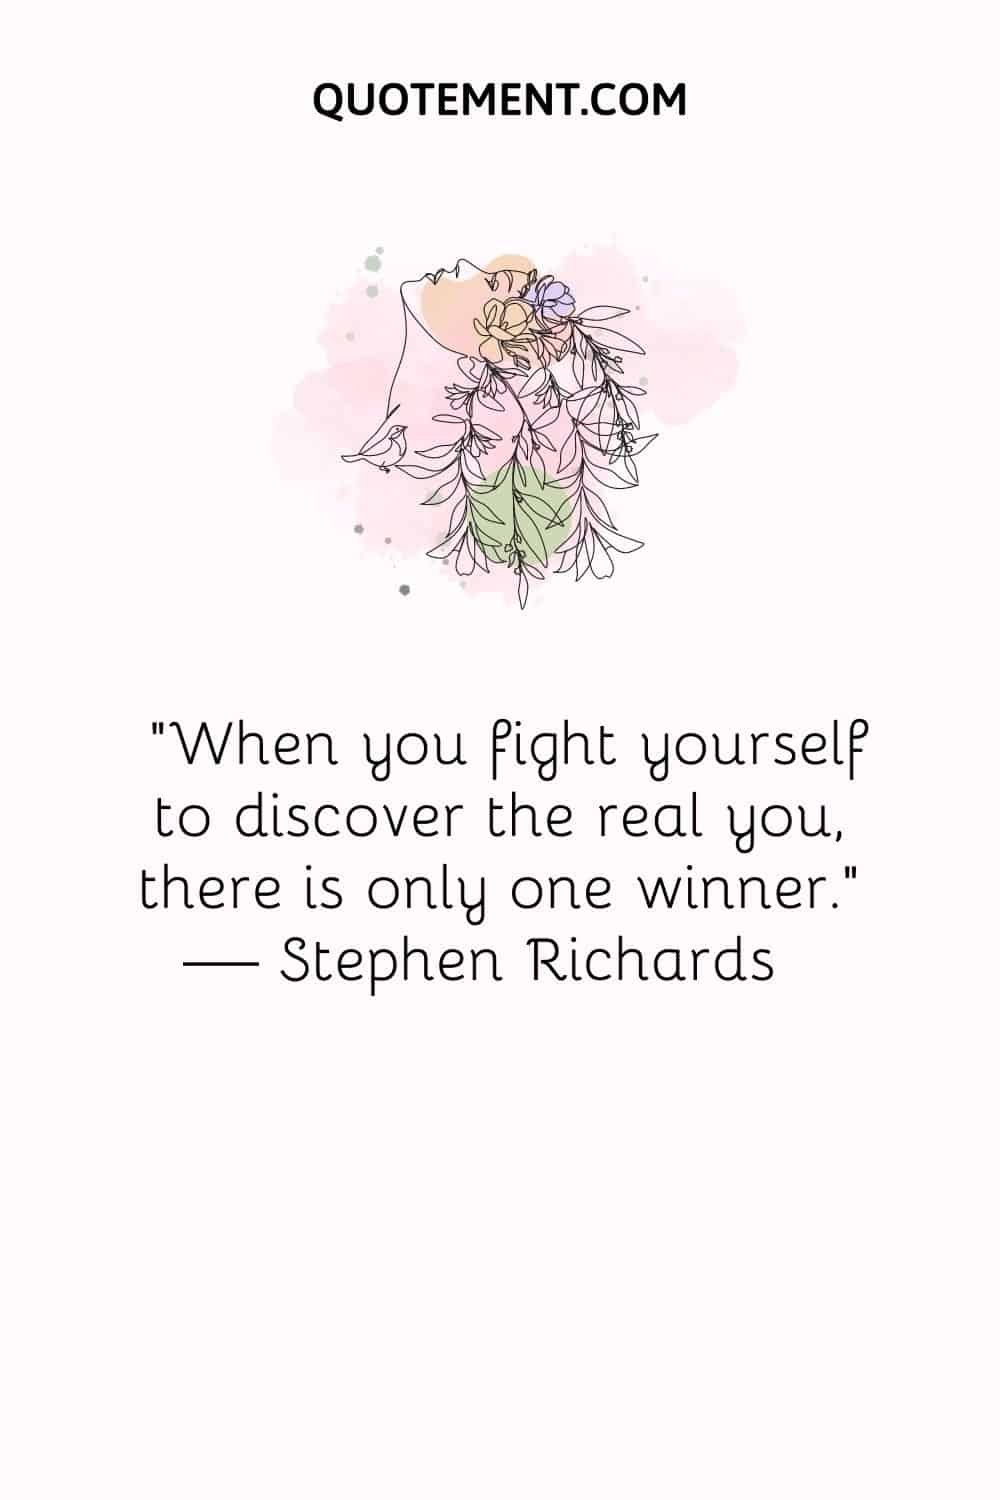 When you fight yourself to discover the real you, there is only one winner